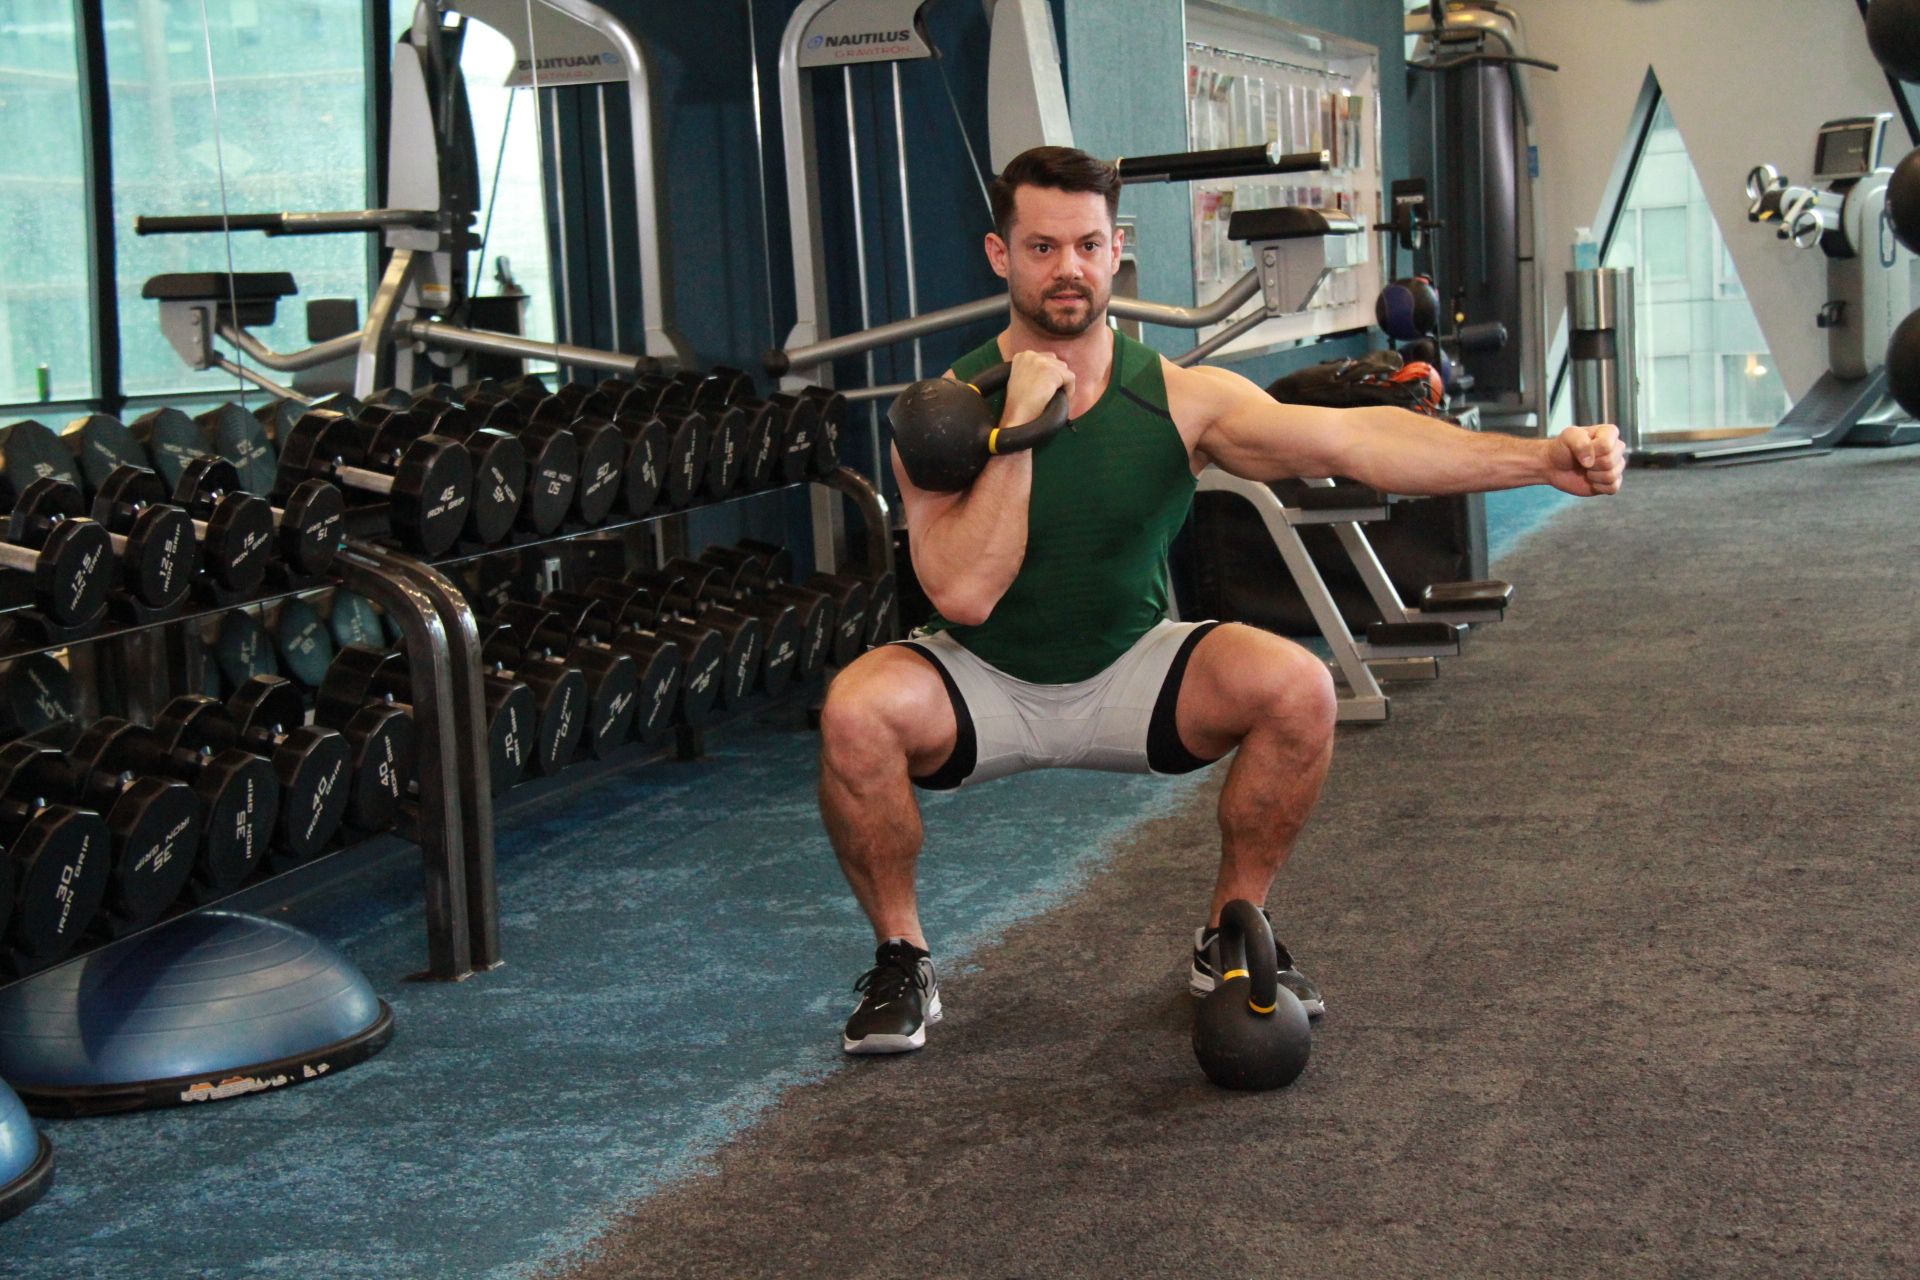 Finish Off Your Leg Day With This Sizzling Squat Session